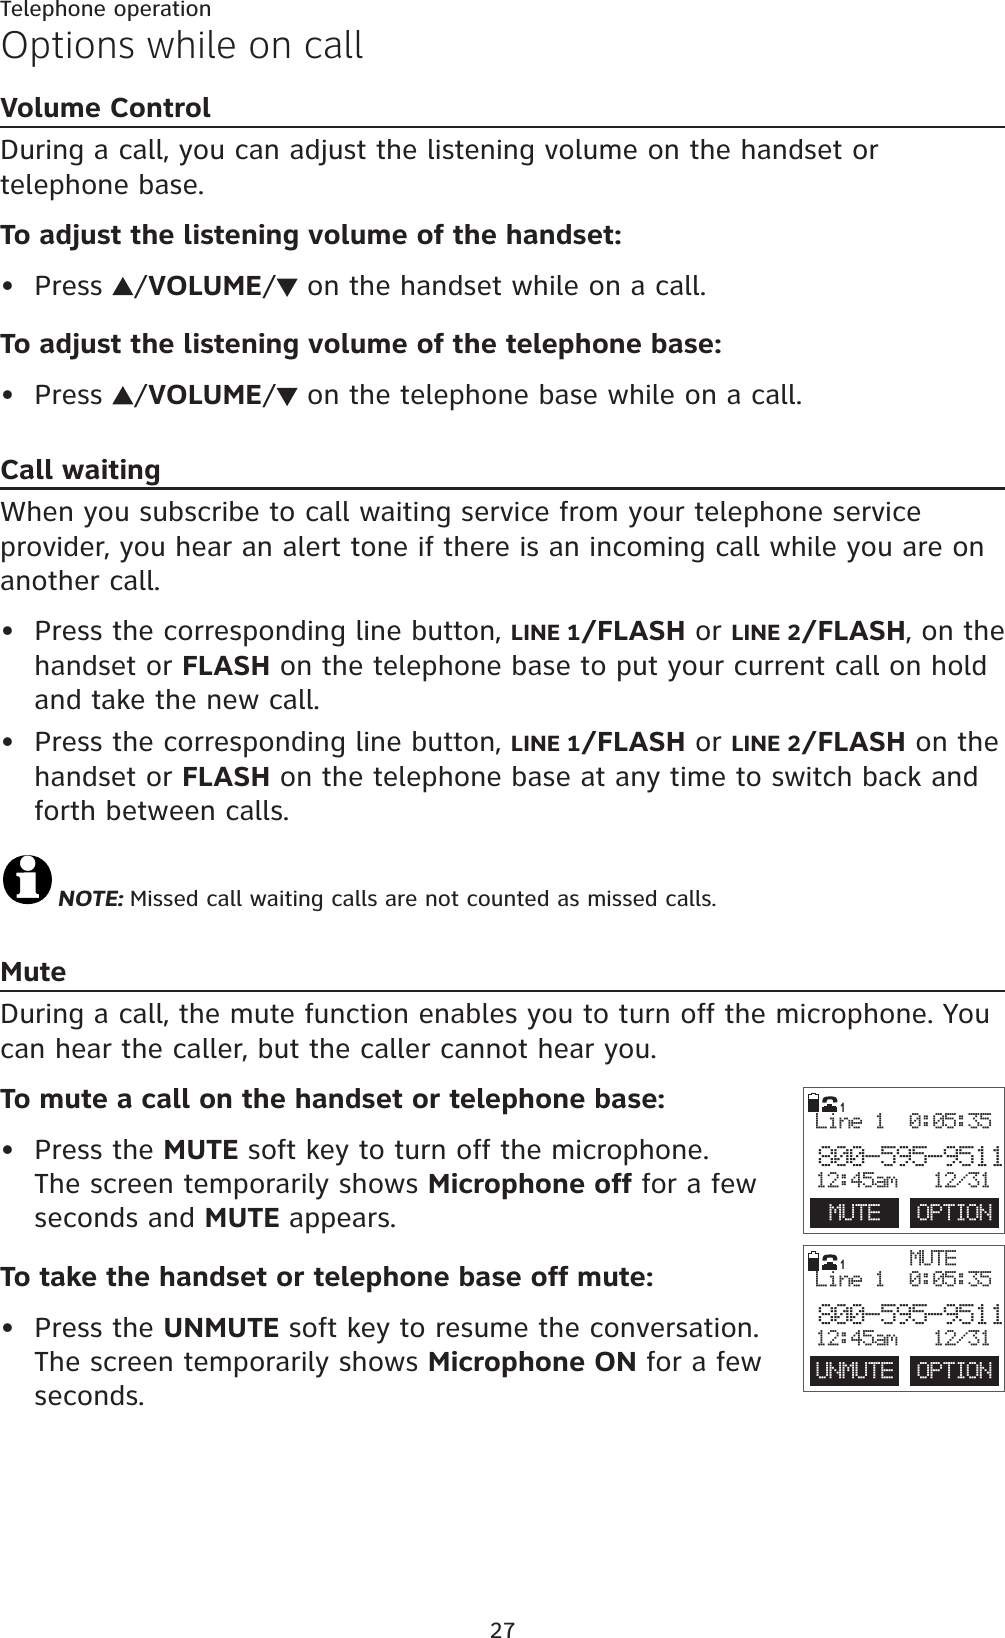 27Telephone operationOptions while on callVolume ControlDuring a call, you can adjust the listening volume on the handset or telephone base.To adjust the listening volume of the handset:Press  /VOLUME/ on the handset while on a call.To adjust the listening volume of the telephone base:Press  /VOLUME/ on the telephone base while on a call.Call waitingWhen you subscribe to call waiting service from your telephone service provider, you hear an alert tone if there is an incoming call while you are on another call.Press the corresponding line button, LINE 1/FLASH or LINE 2/FLASH, on the handset or FLASH on the telephone base to put your current call on hold and take the new call. Press the corresponding line button, LINE 1/FLASH or LINE 2/FLASH on the handset or FLASH on the telephone base at any time to switch back and forth between calls.NOTE: Missed call waiting calls are not counted as missed calls.MuteDuring a call, the mute function enables you to turn off the microphone. You can hear the caller, but the caller cannot hear you.To mute a call on the handset or telephone base:Press the MUTE soft key to turn off the microphone. The screen temporarily shows Microphone off for a few seconds and MUTE appears.To take the handset or telephone base off mute:Press the UNMUTE soft key to resume the conversation. The screen temporarily shows Microphone ON for a few seconds.••••••1MUTEUNMUTE  OPTIONLine 1  0:05:35800-595-951112:45am   12/31MUTE  OPTIONLine 1  0:05:35800-595-951112:45am   12/311